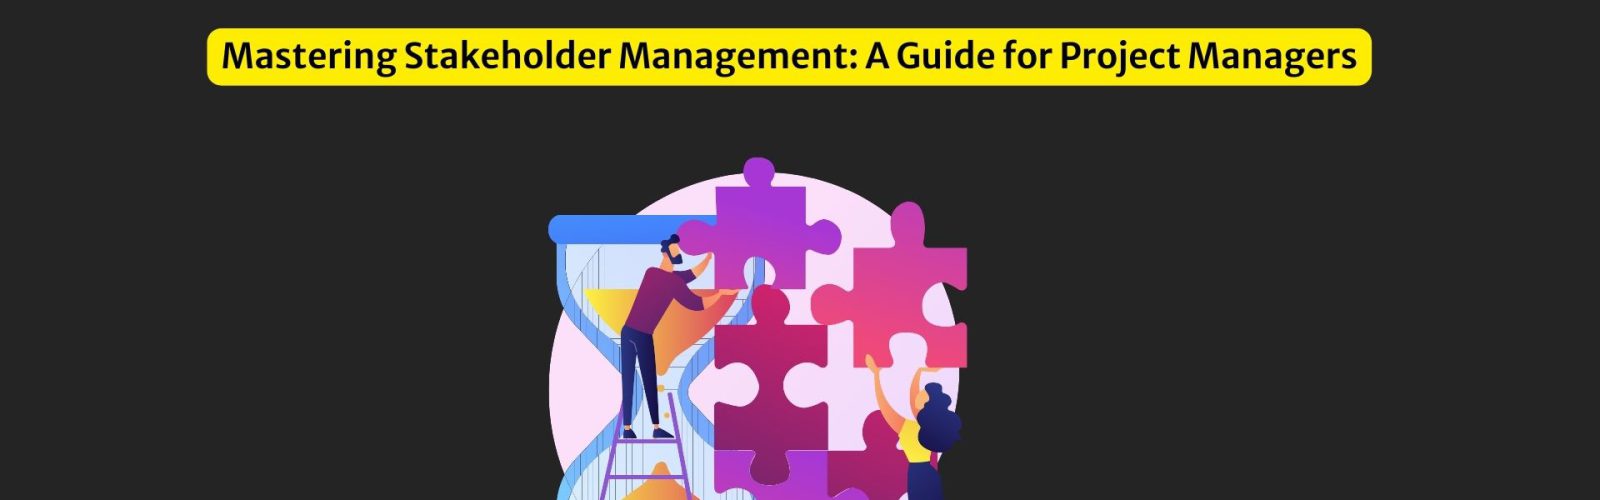 Mastering Stakeholder Management A Guide for Project Managers (1)